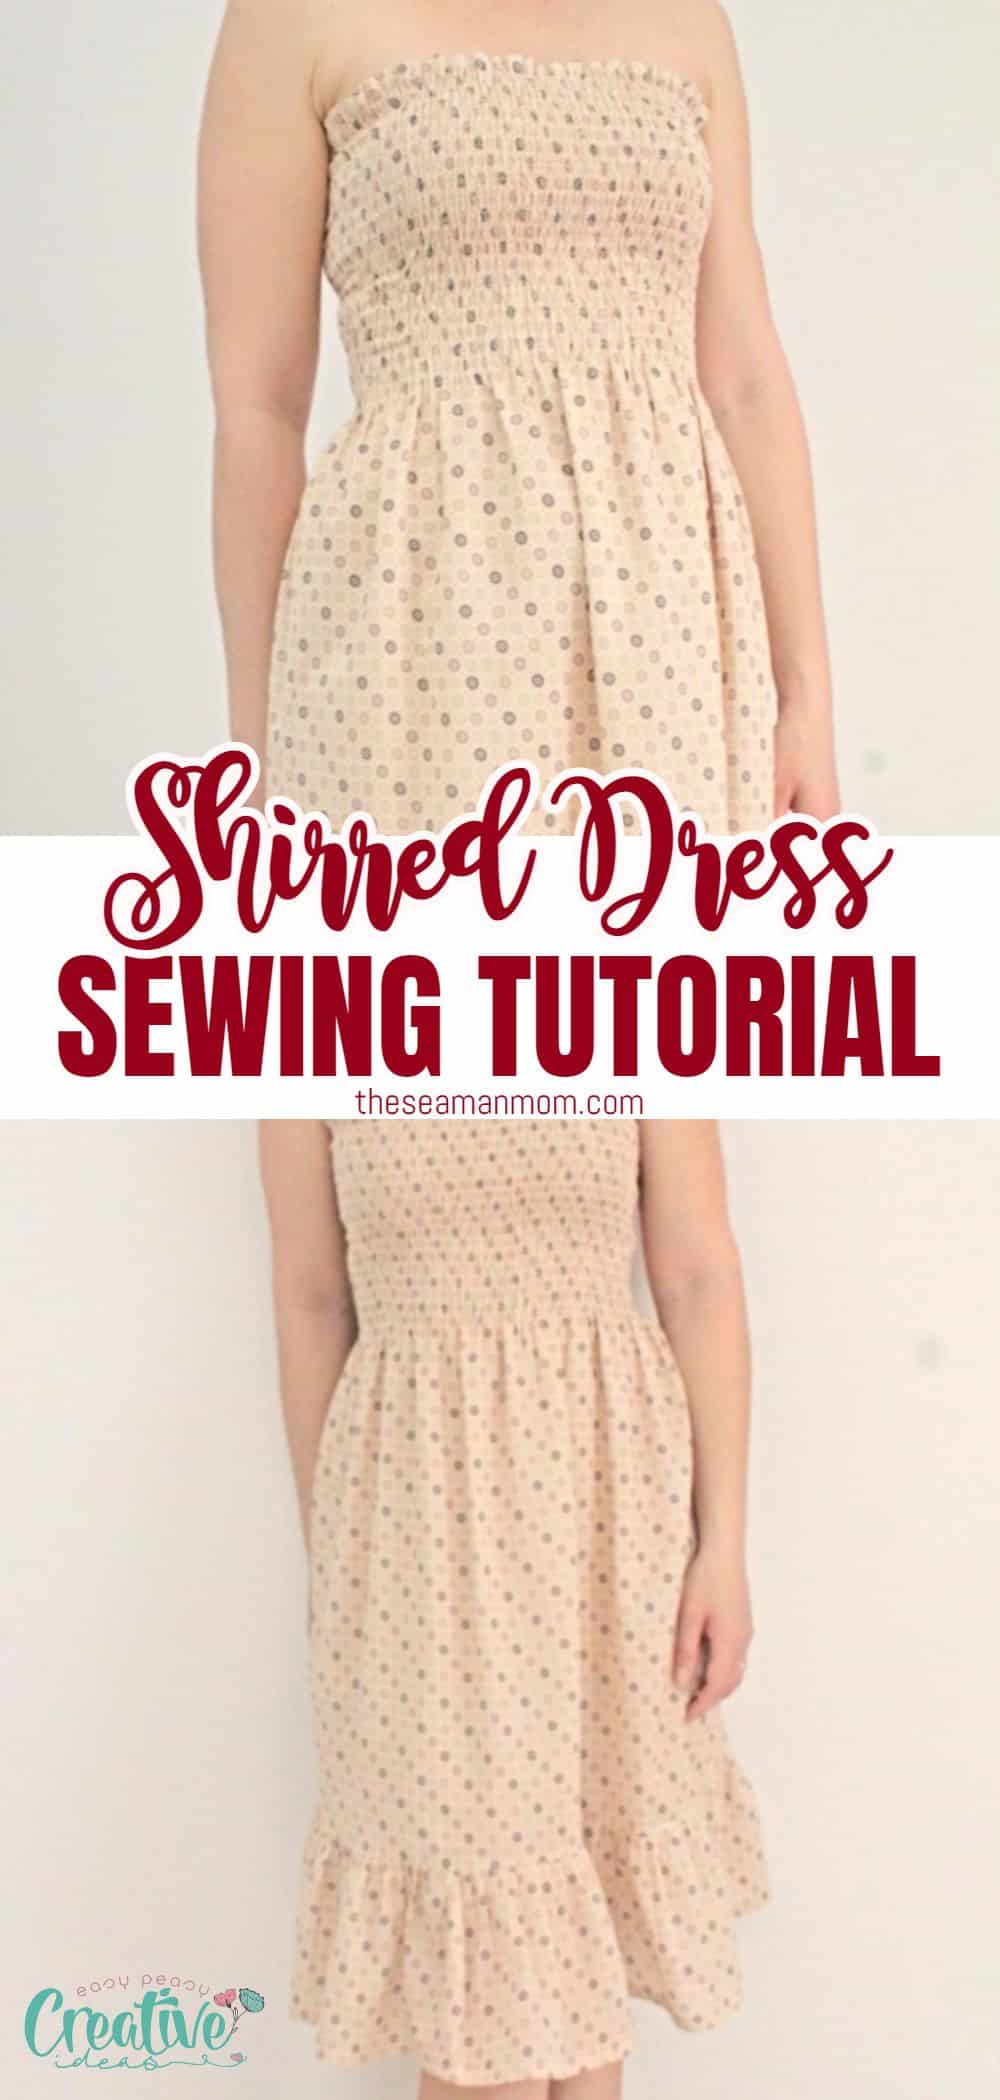 When it comes to summery style, there's no faster way to put together a stunning look than with this shirred dress! Easy enough for beginners and completed in minutes – this charming sundress is the ideal addition to your wardrobe. via @petroneagu